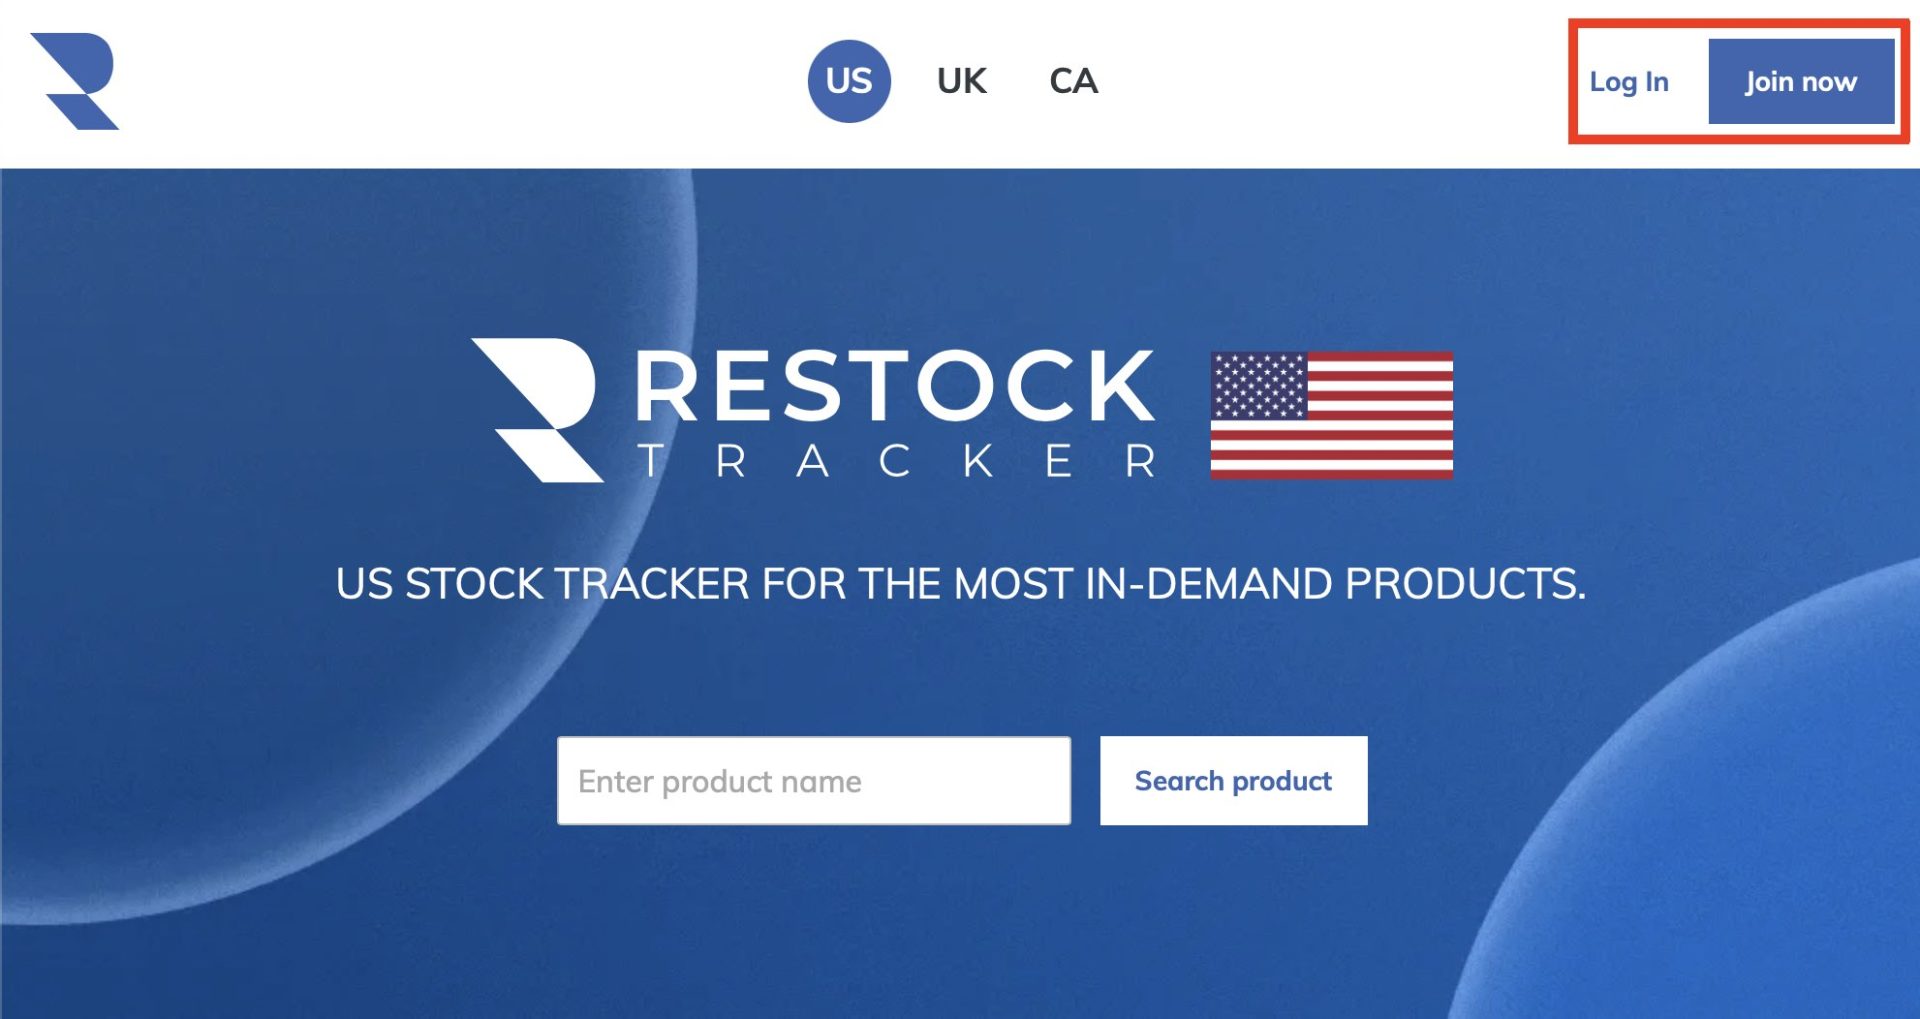 Restock Tracker Log In or Join Now